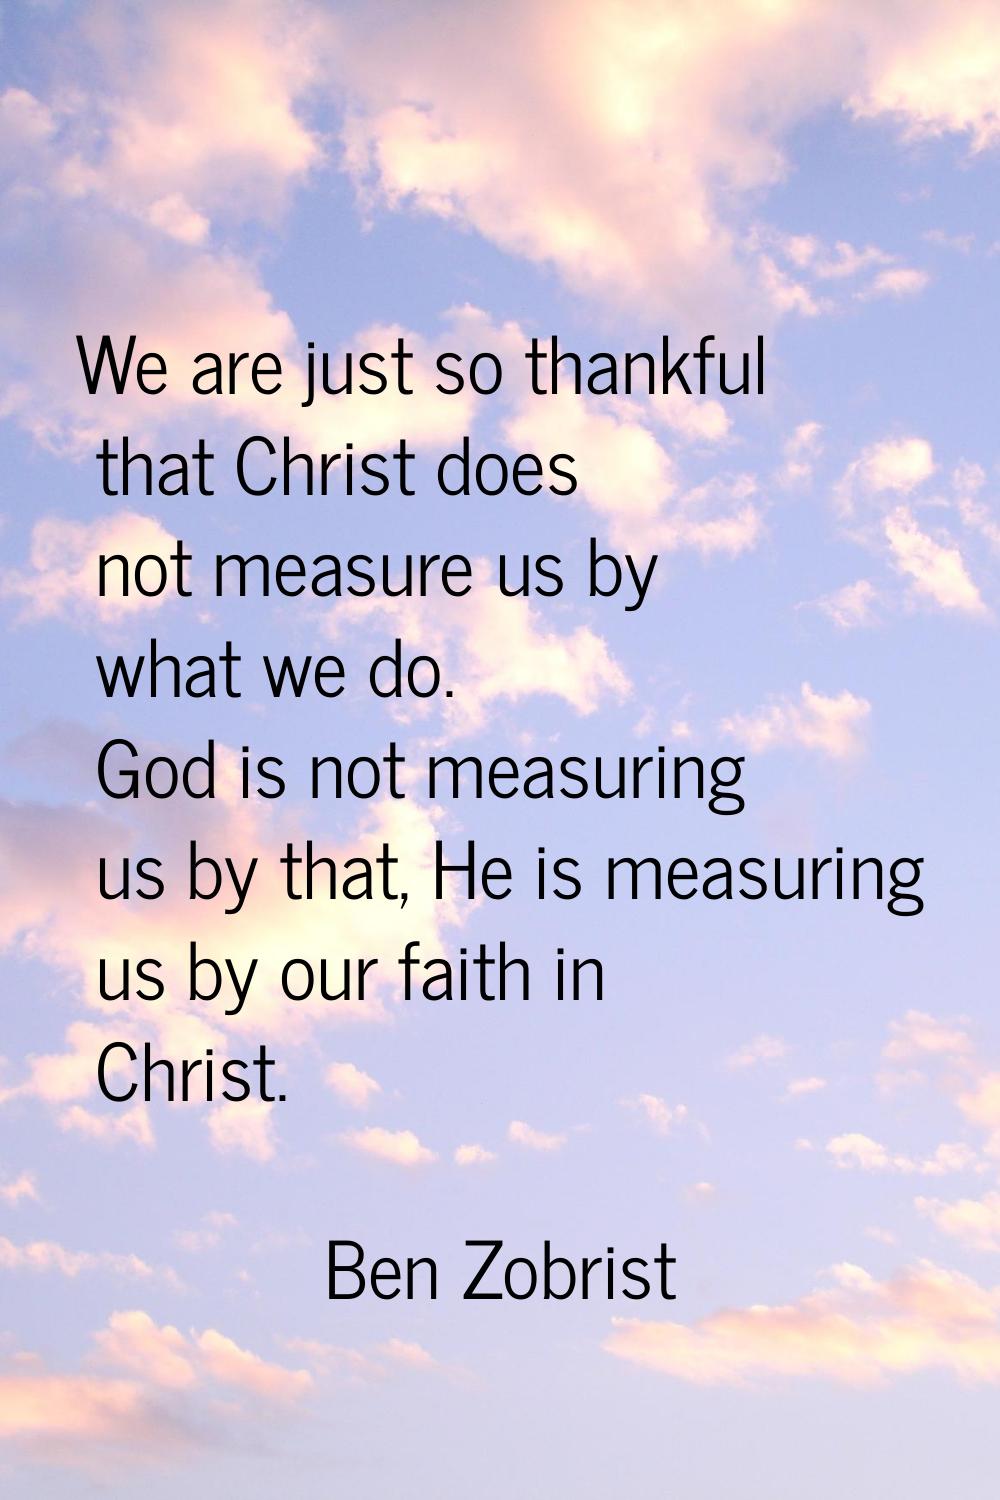 We are just so thankful that Christ does not measure us by what we do. God is not measuring us by t